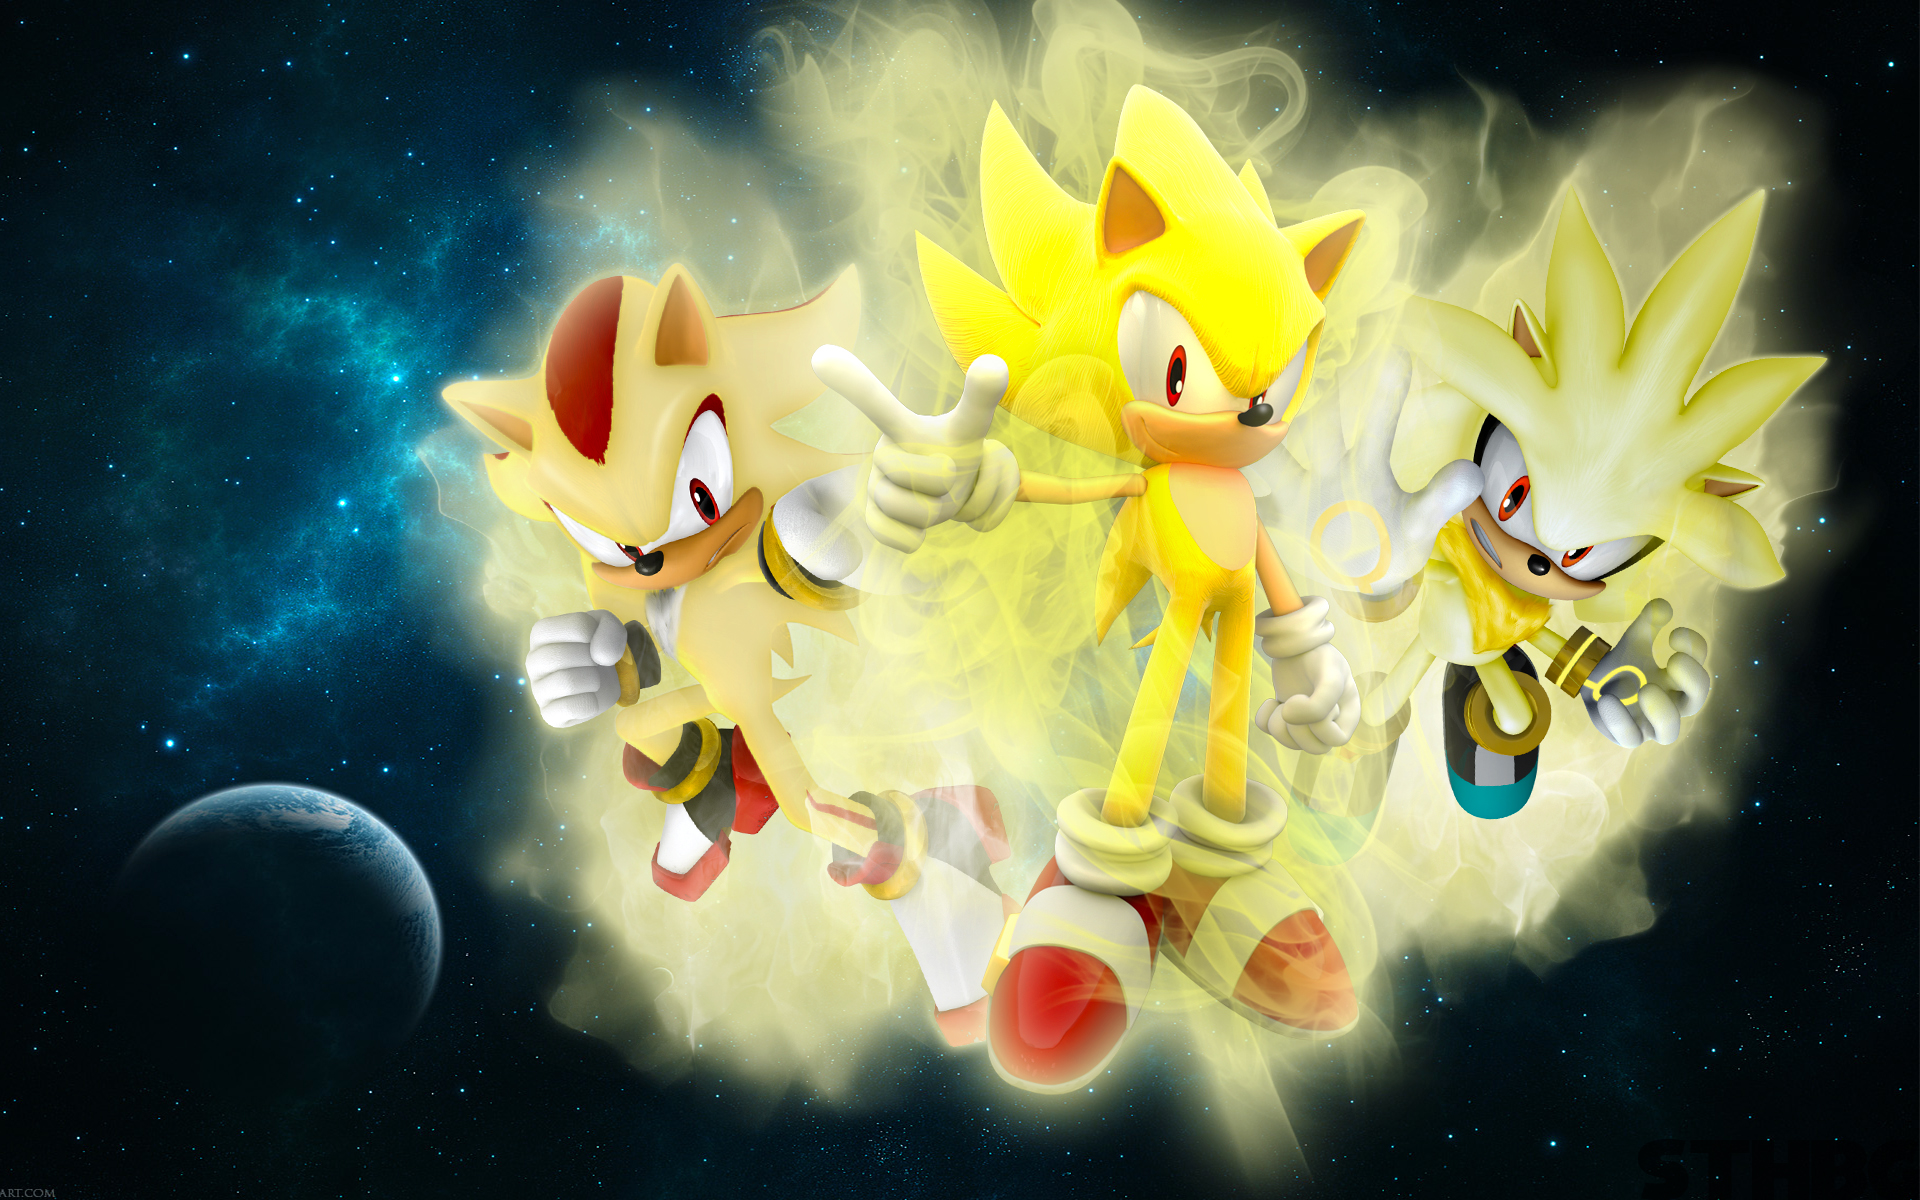 super sonic and super tails from Sonic and Tails R wallpapers by TheEmuEmi  : r/SonicTheHedgehog